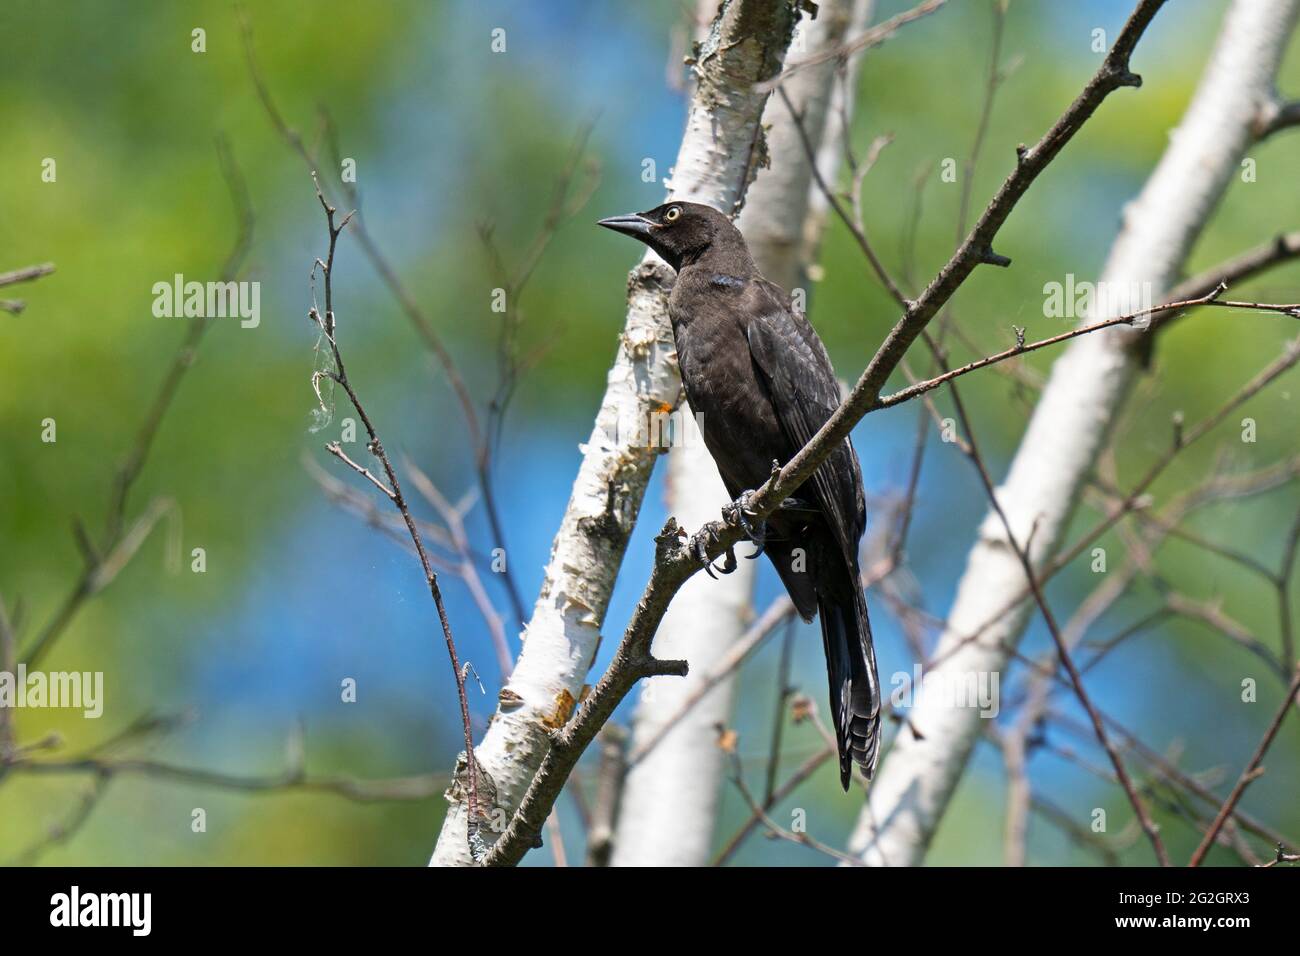 Juvenile Common Grackle (Quiscalus Quiscula), Young Immature Bird Stock Photo